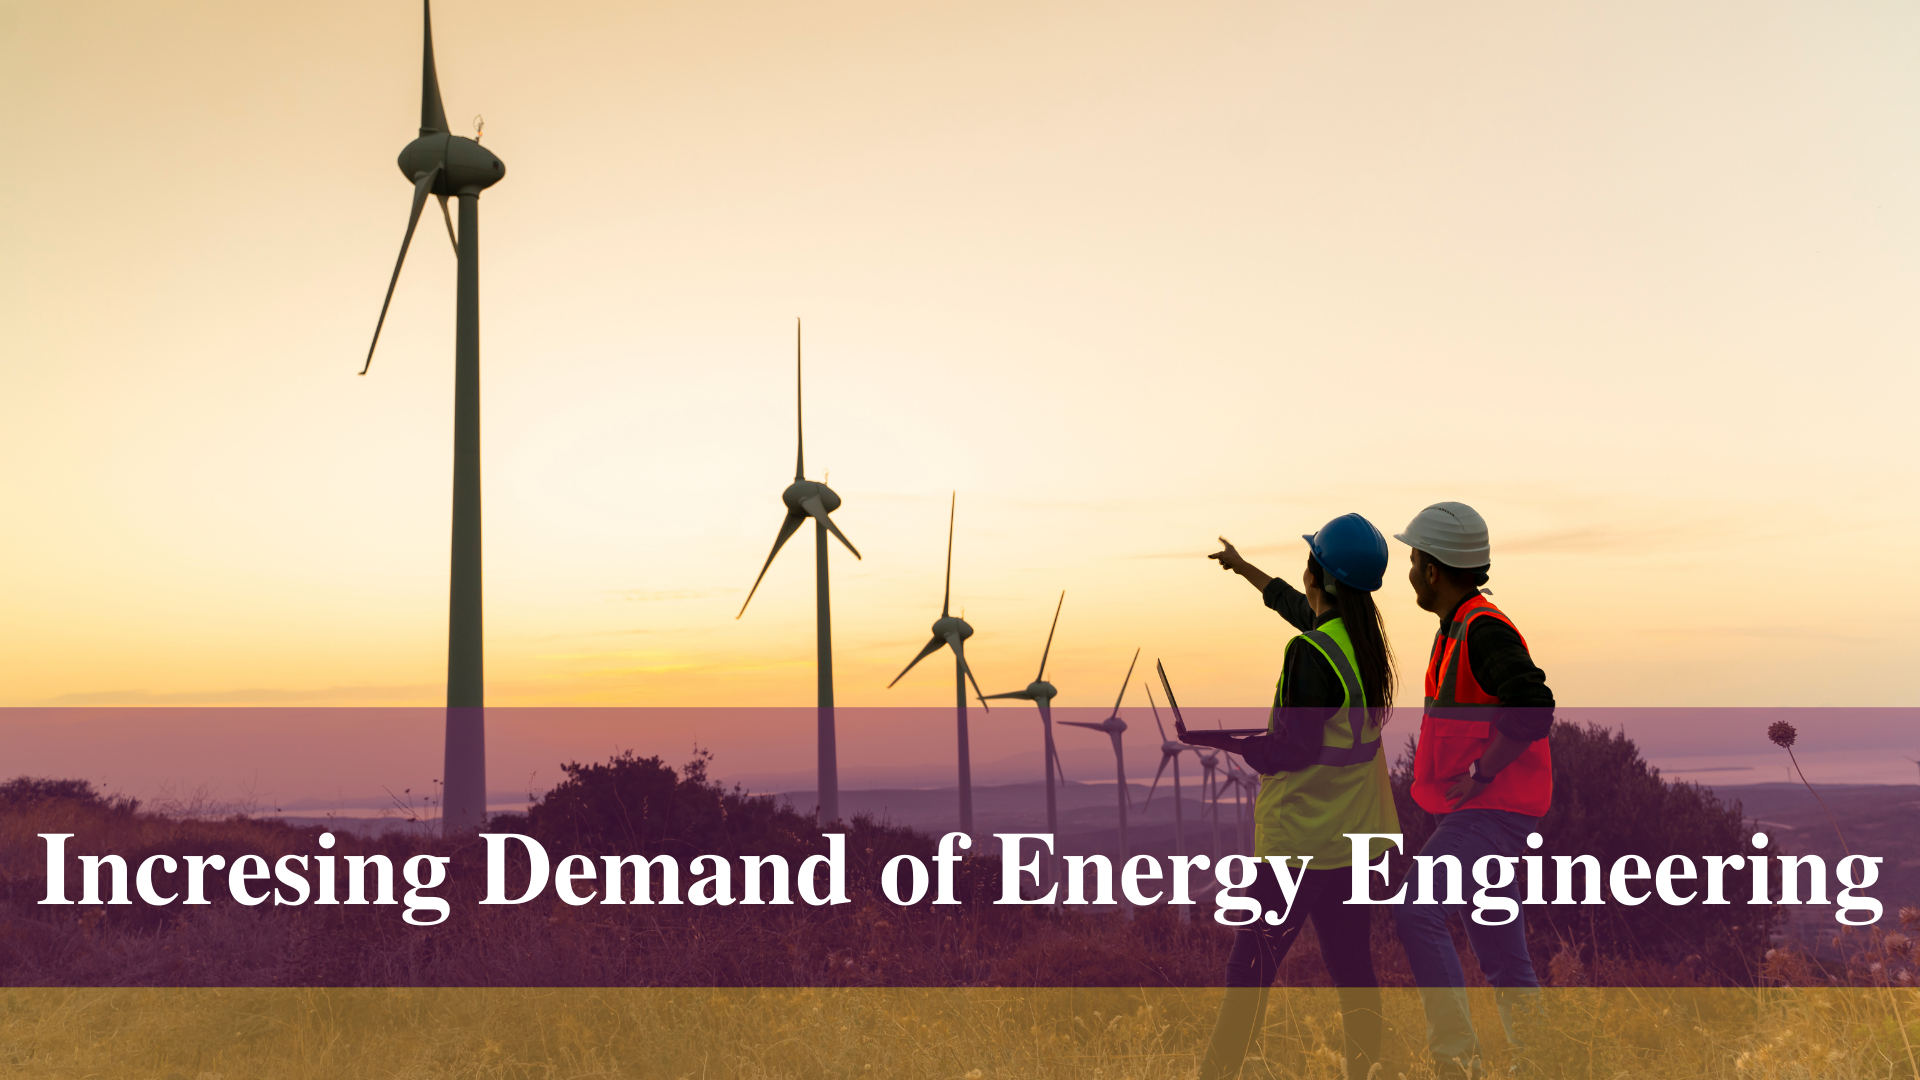 Climate challenge increased demand for Energy Engineering